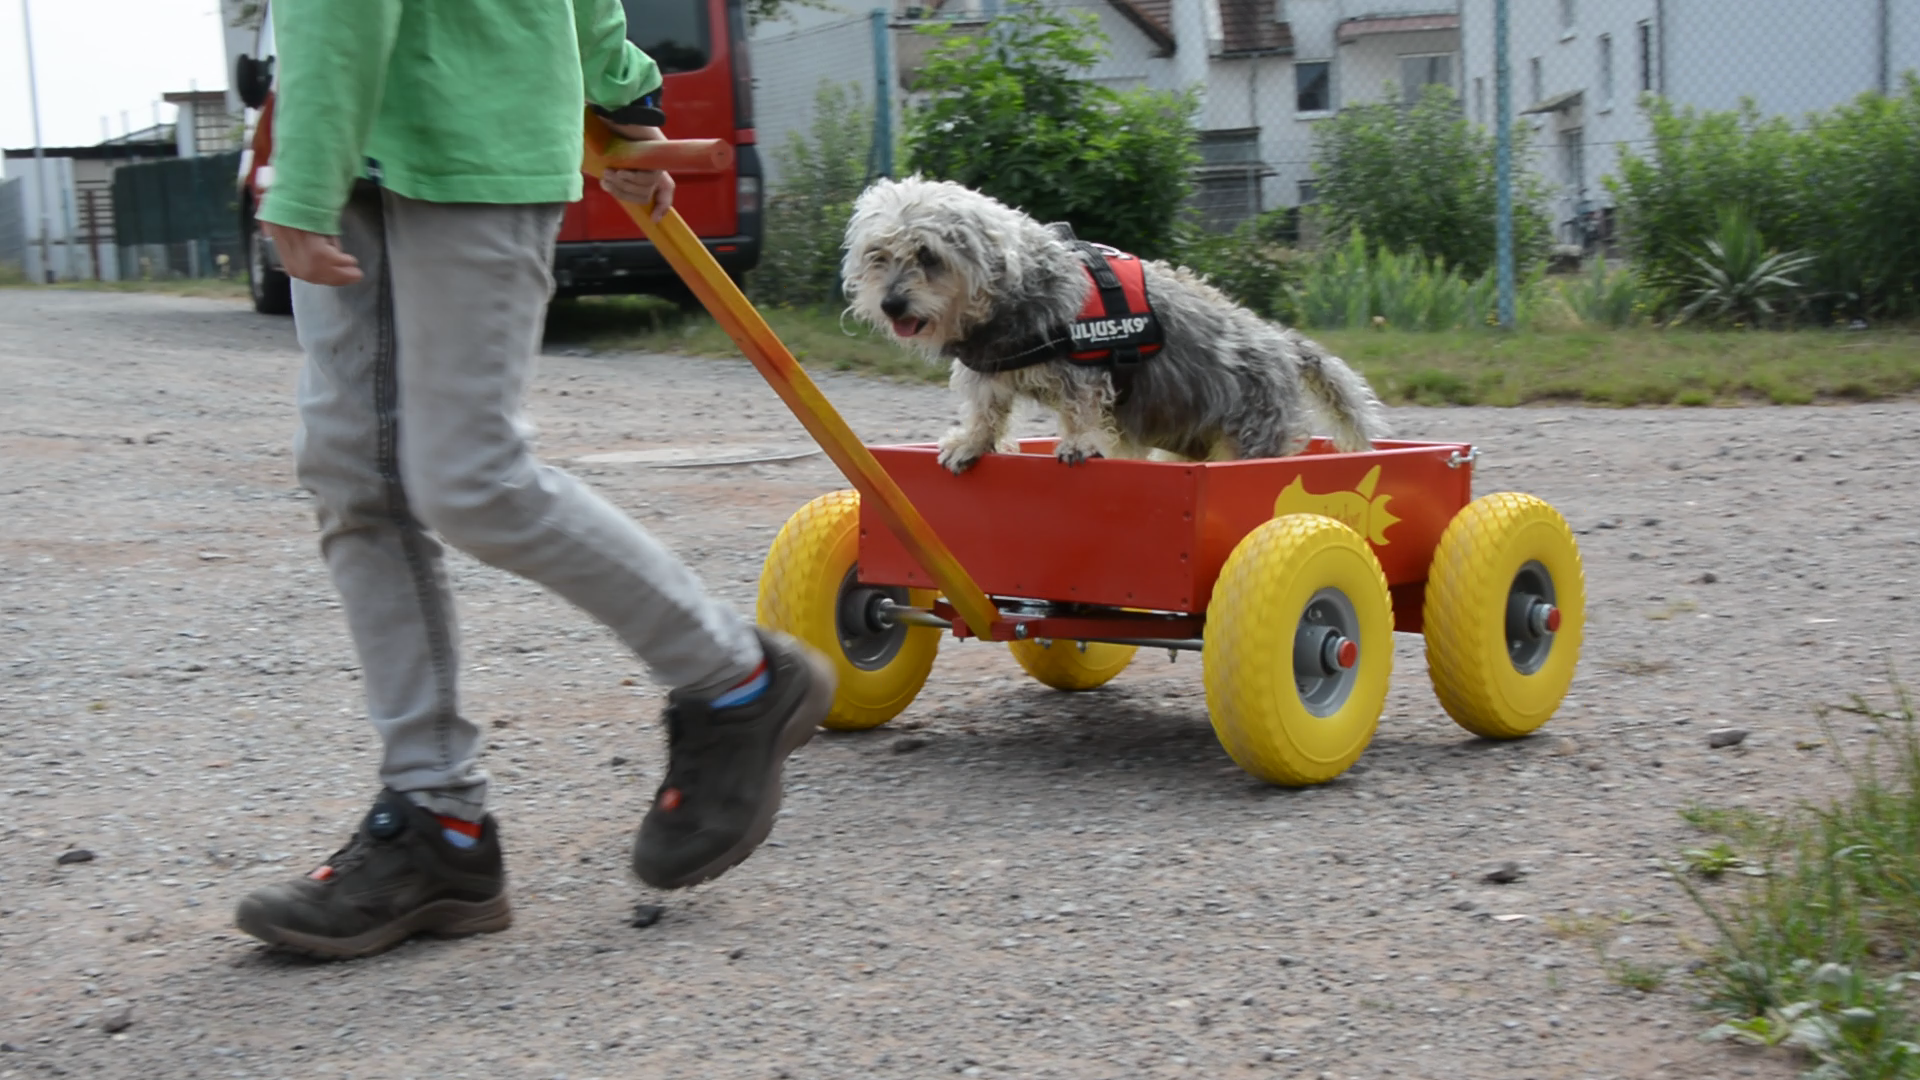 Dog Transport Wagon - woodworking with kids - Way of Wood